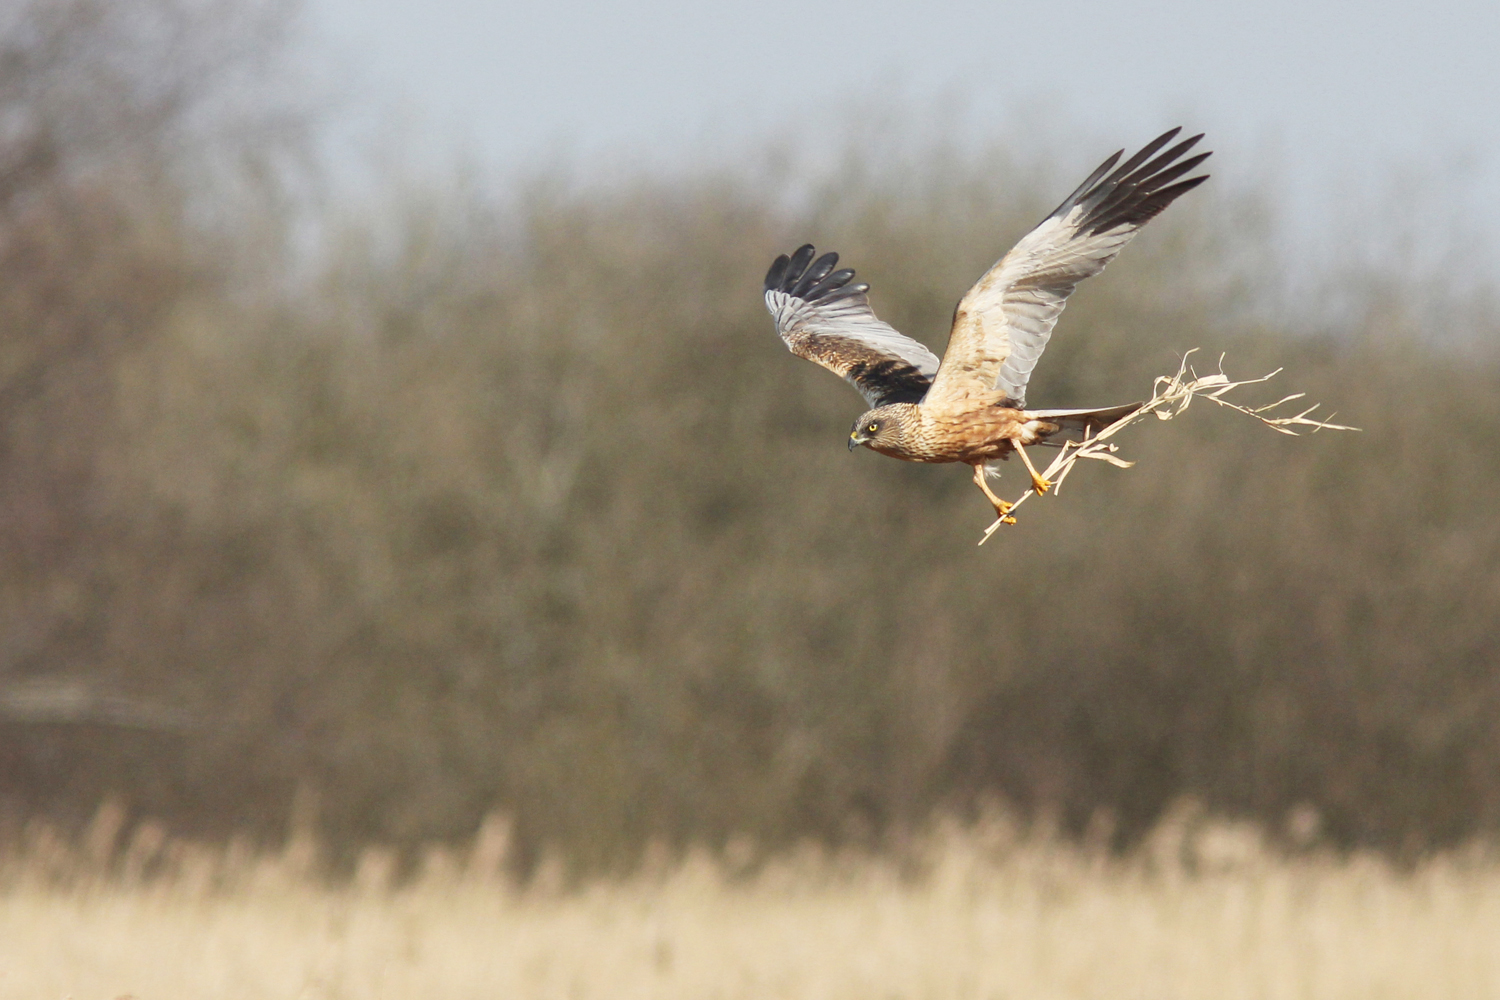 Marsh harrier in flight carrying a stick with reeds visible in the background, by Jackie Dent